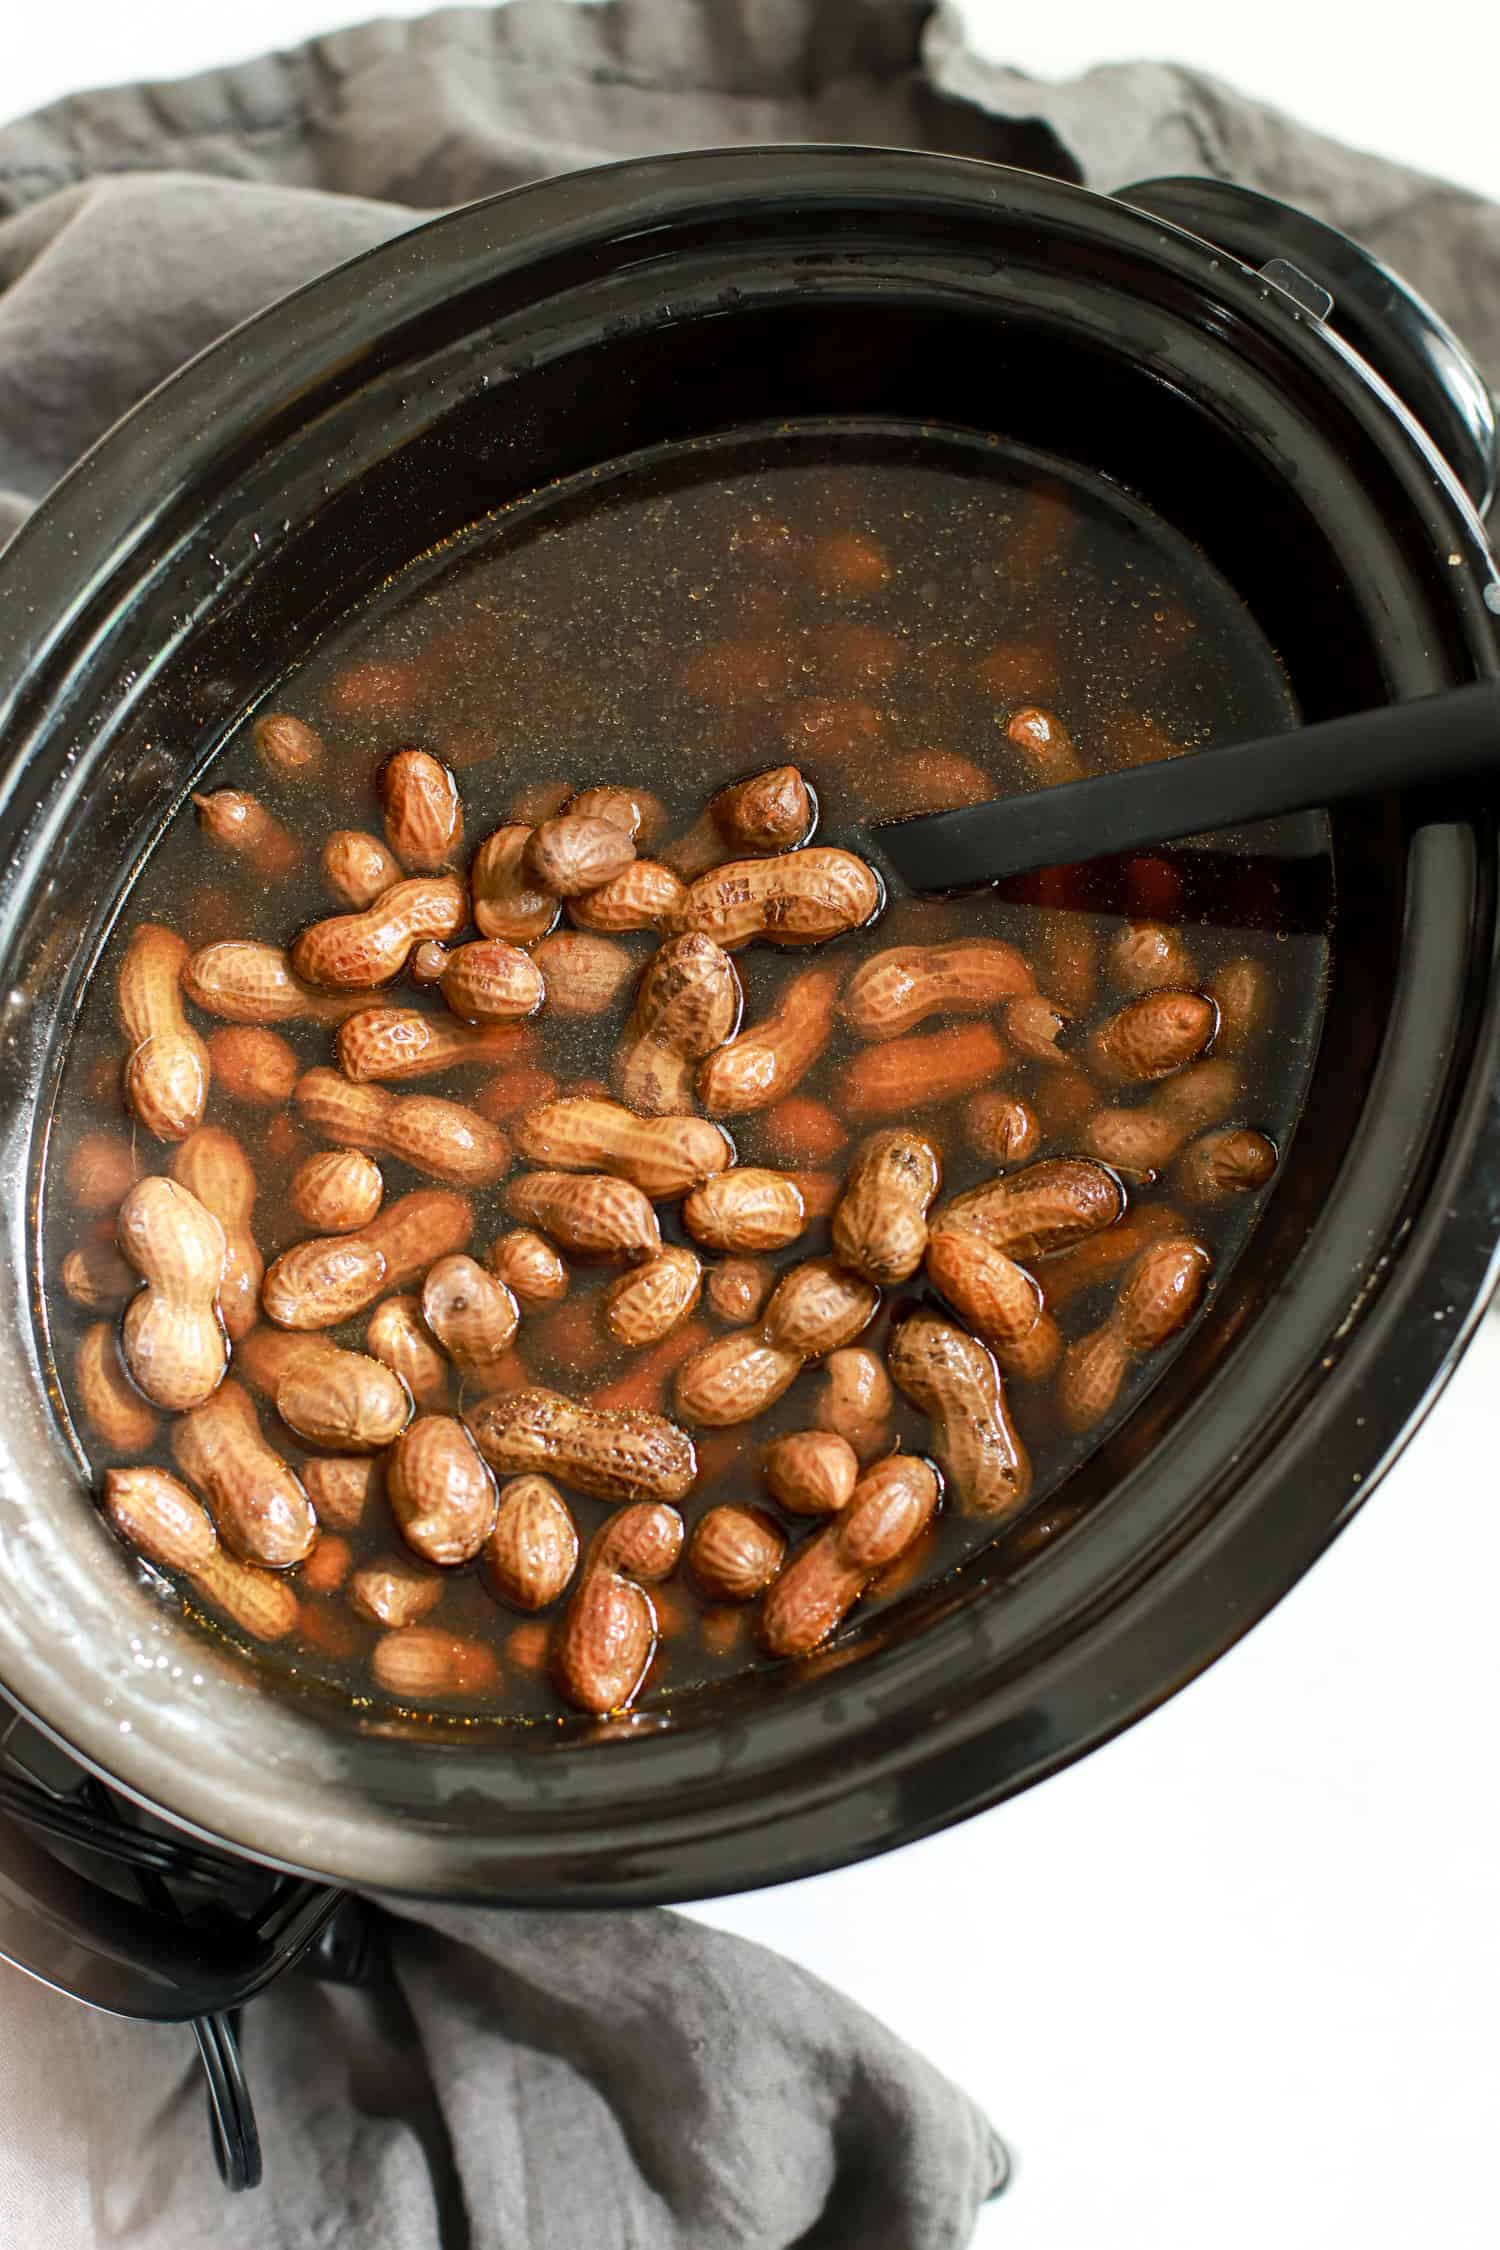 Slow cooker holding boiled peanuts with a black spoon.